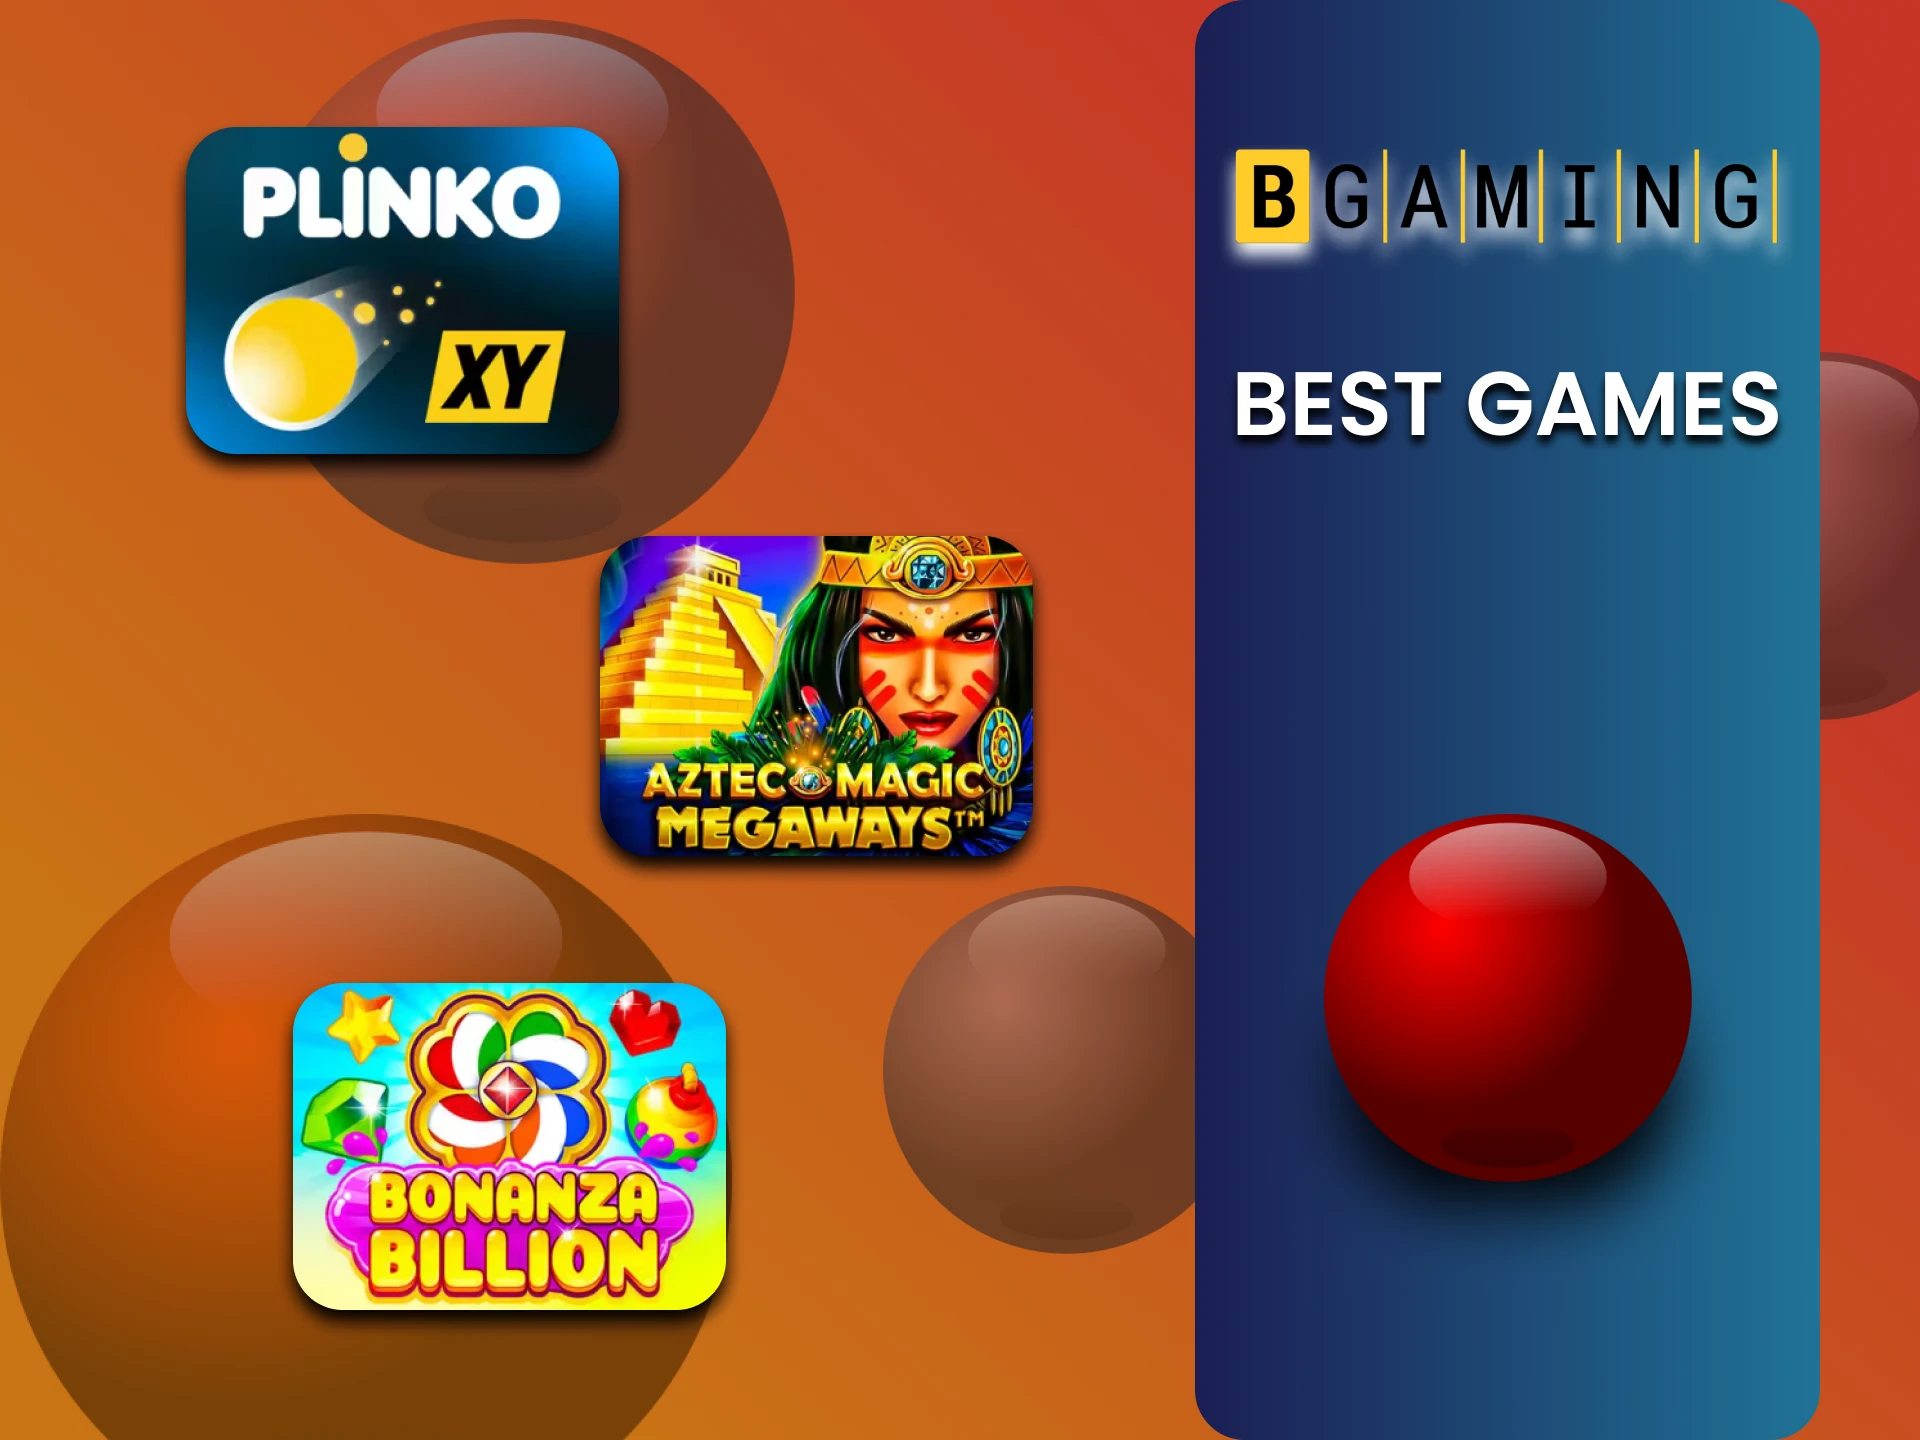 Play the best games from BGaming.